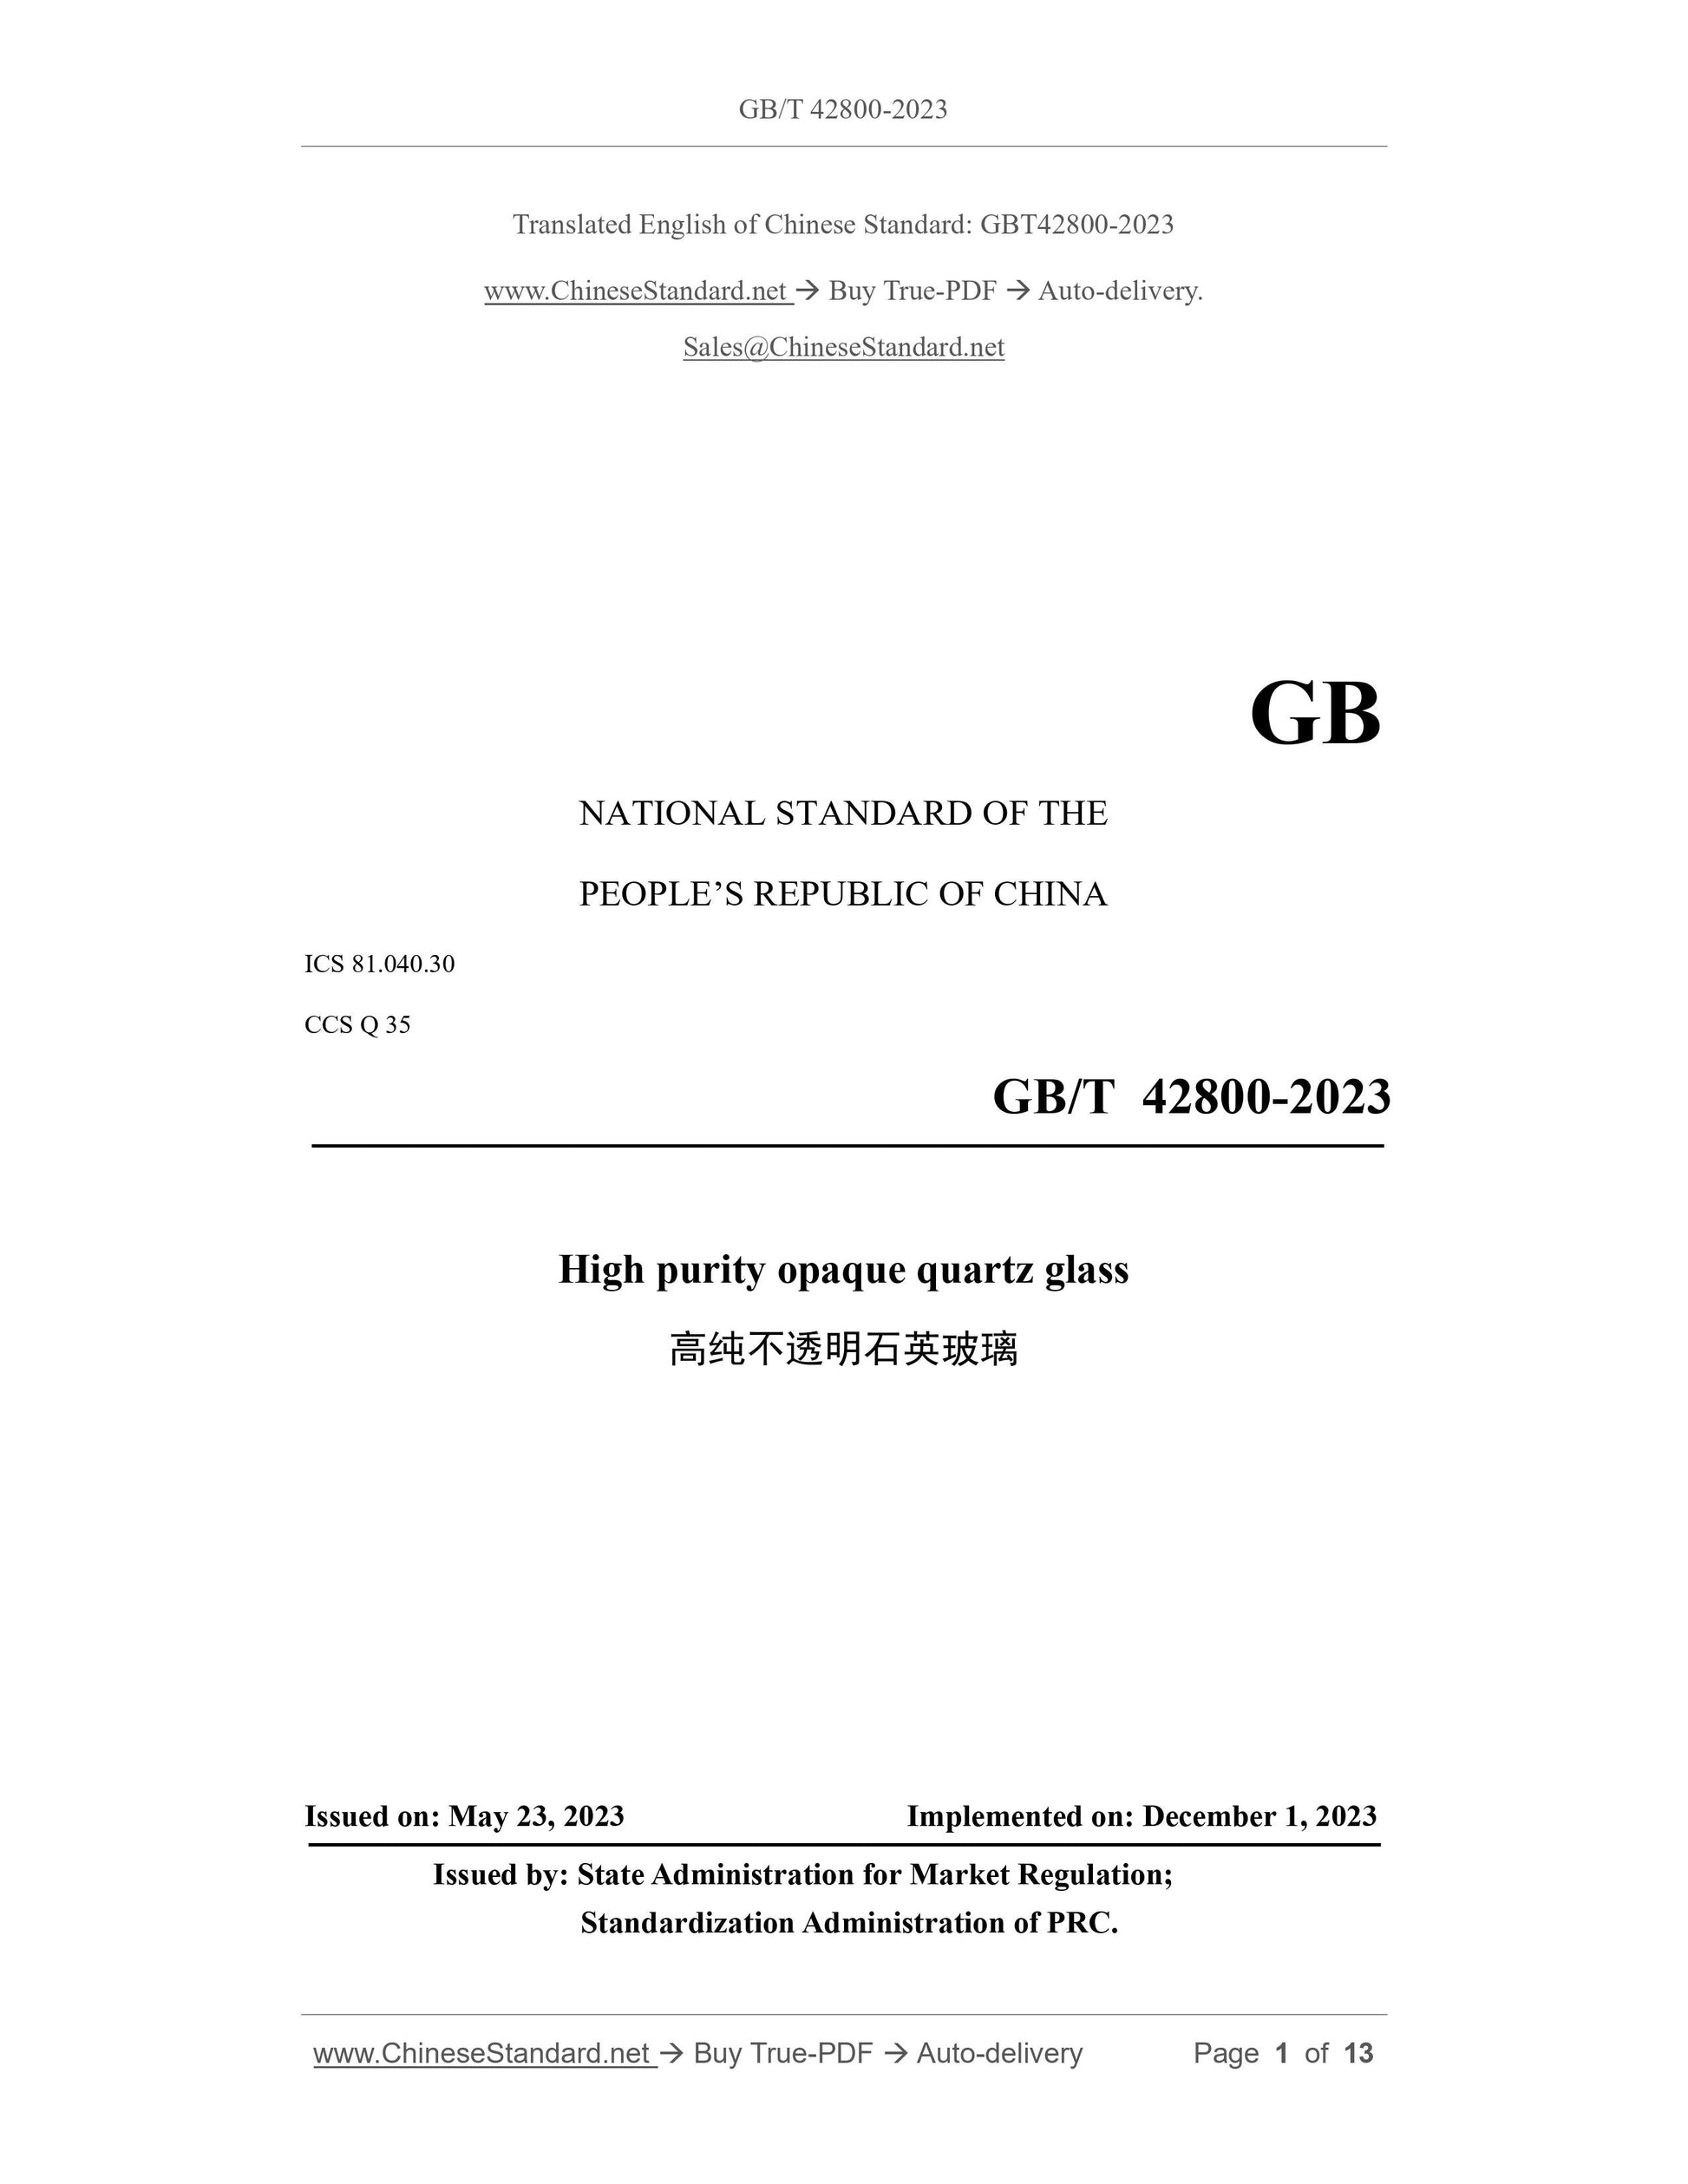 GB/T 42800-2023 Page 1